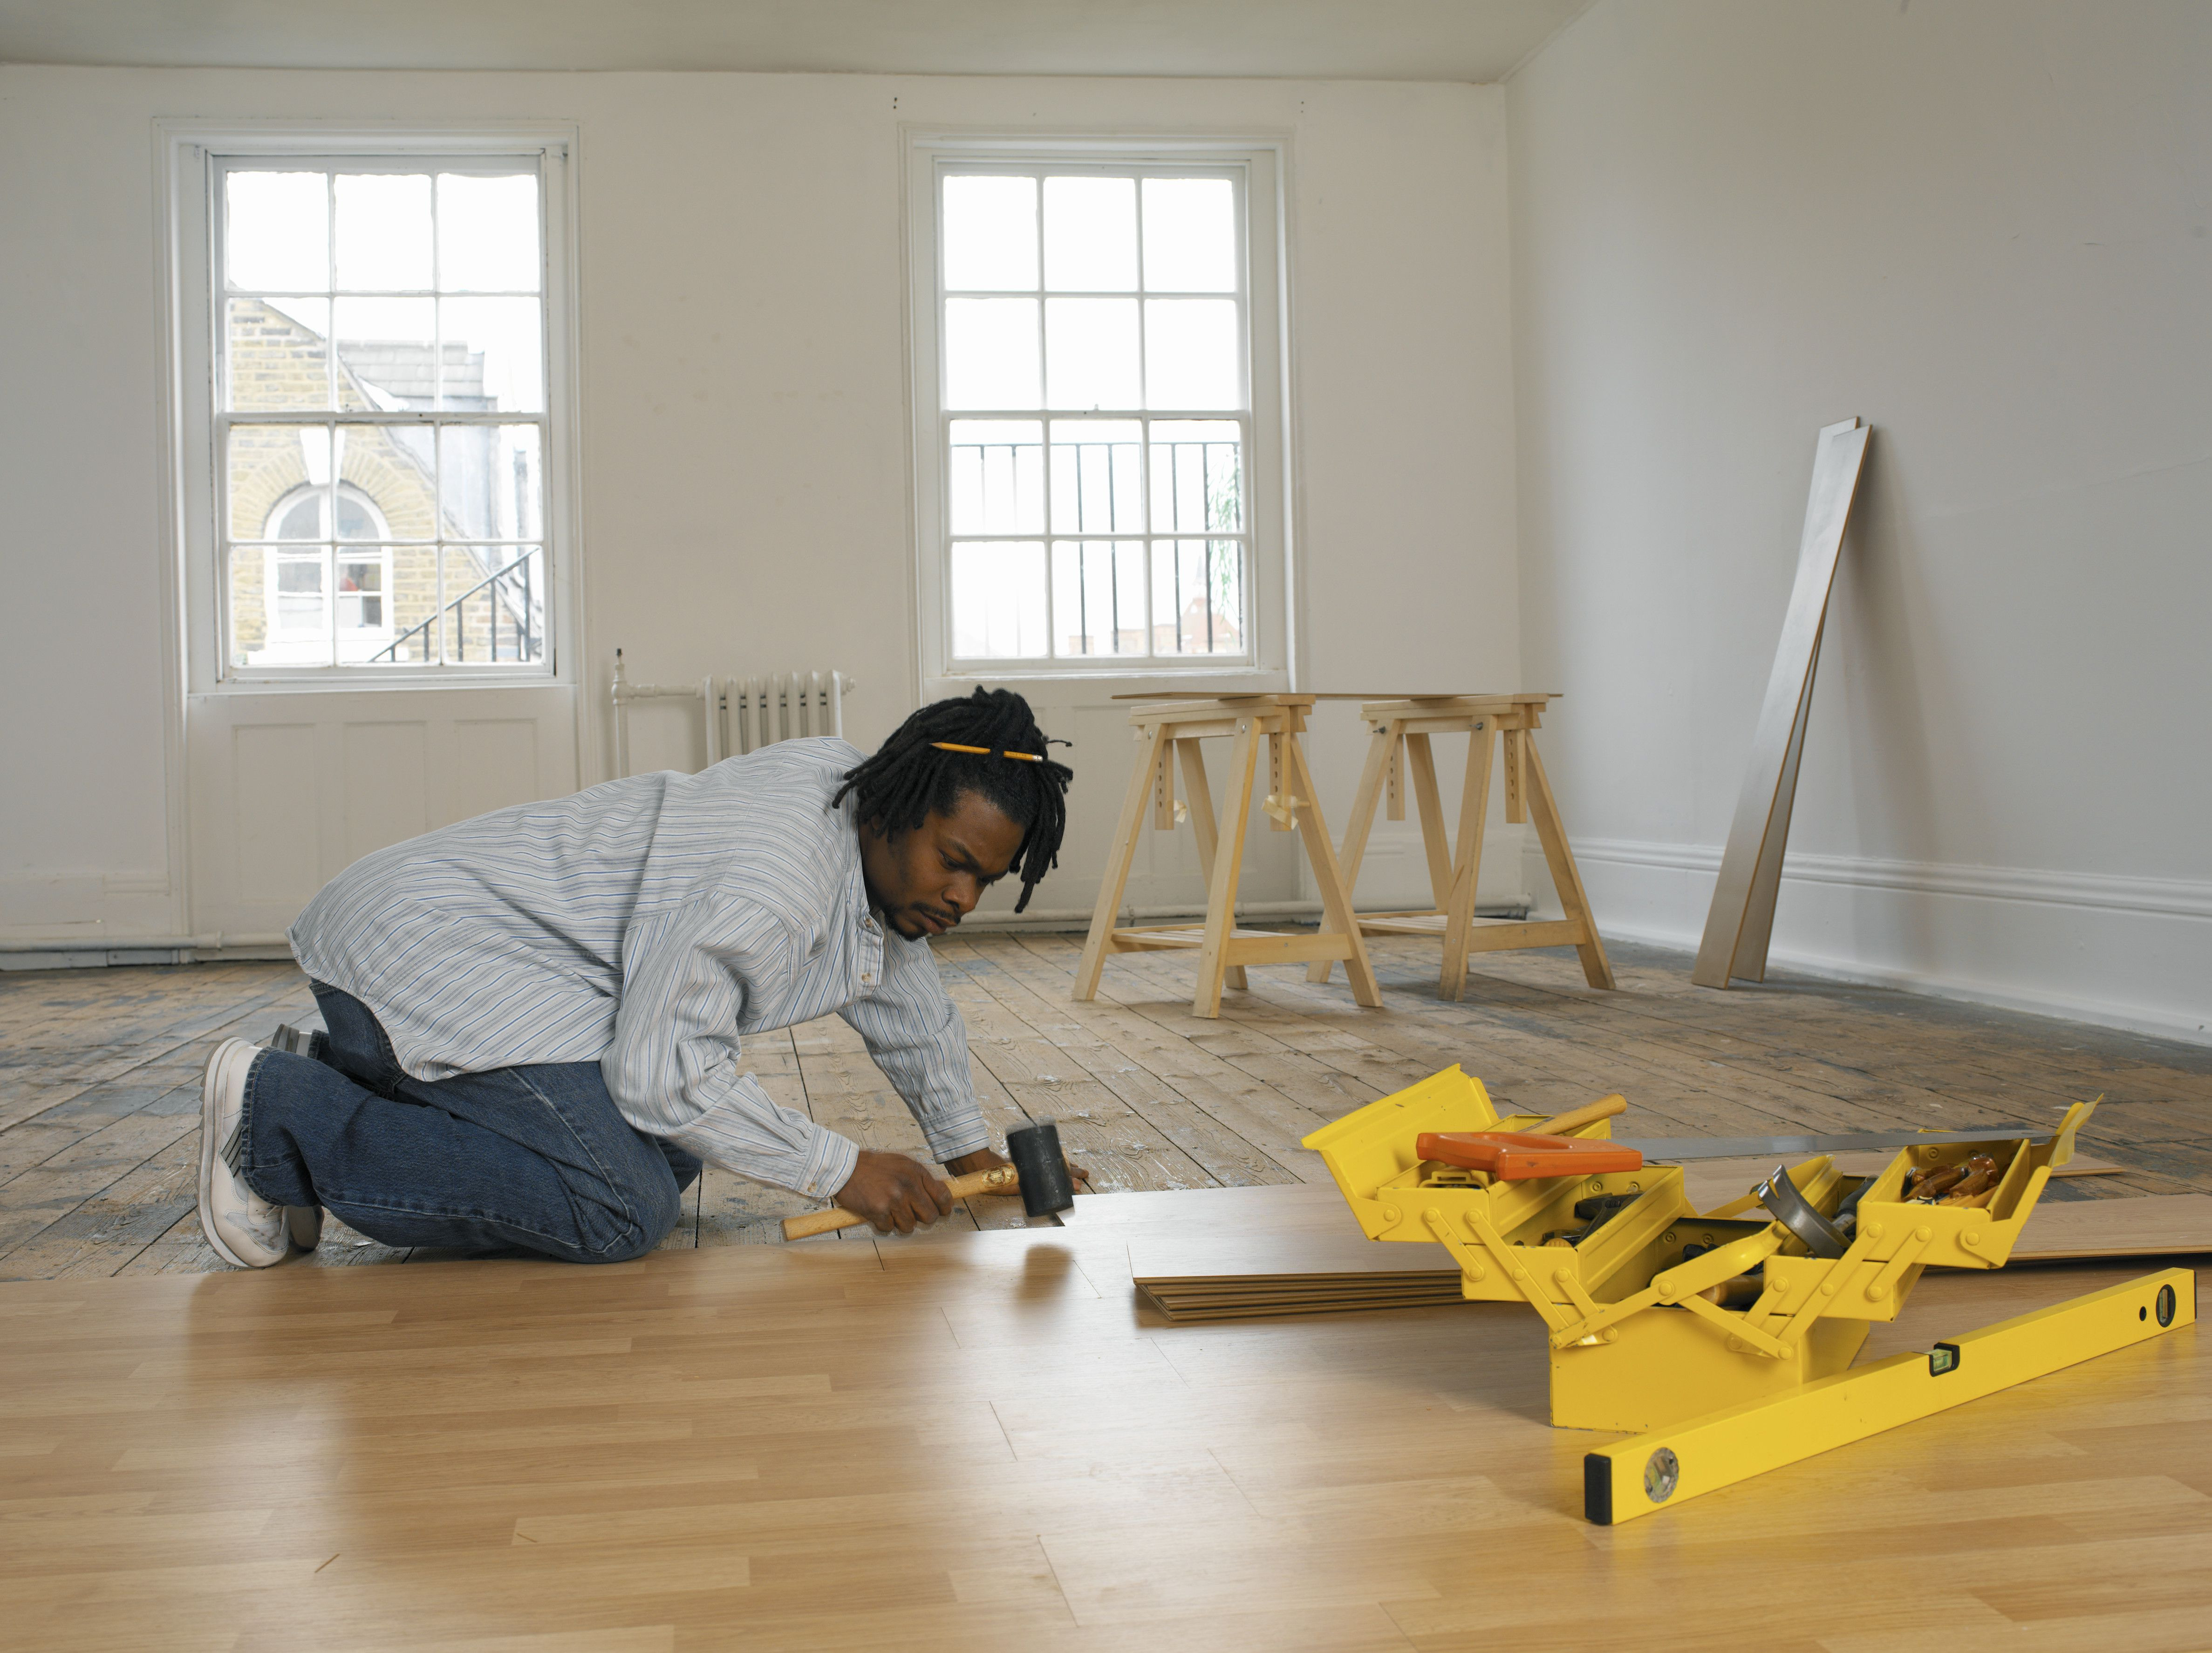 15 Lovely Home Depot Hardwood Floor Cost Per Square Foot 2023 free download home depot hardwood floor cost per square foot of ikea flooring review overview with regard to young man laying floor 200199826 001 57e96a973df78c690f719440